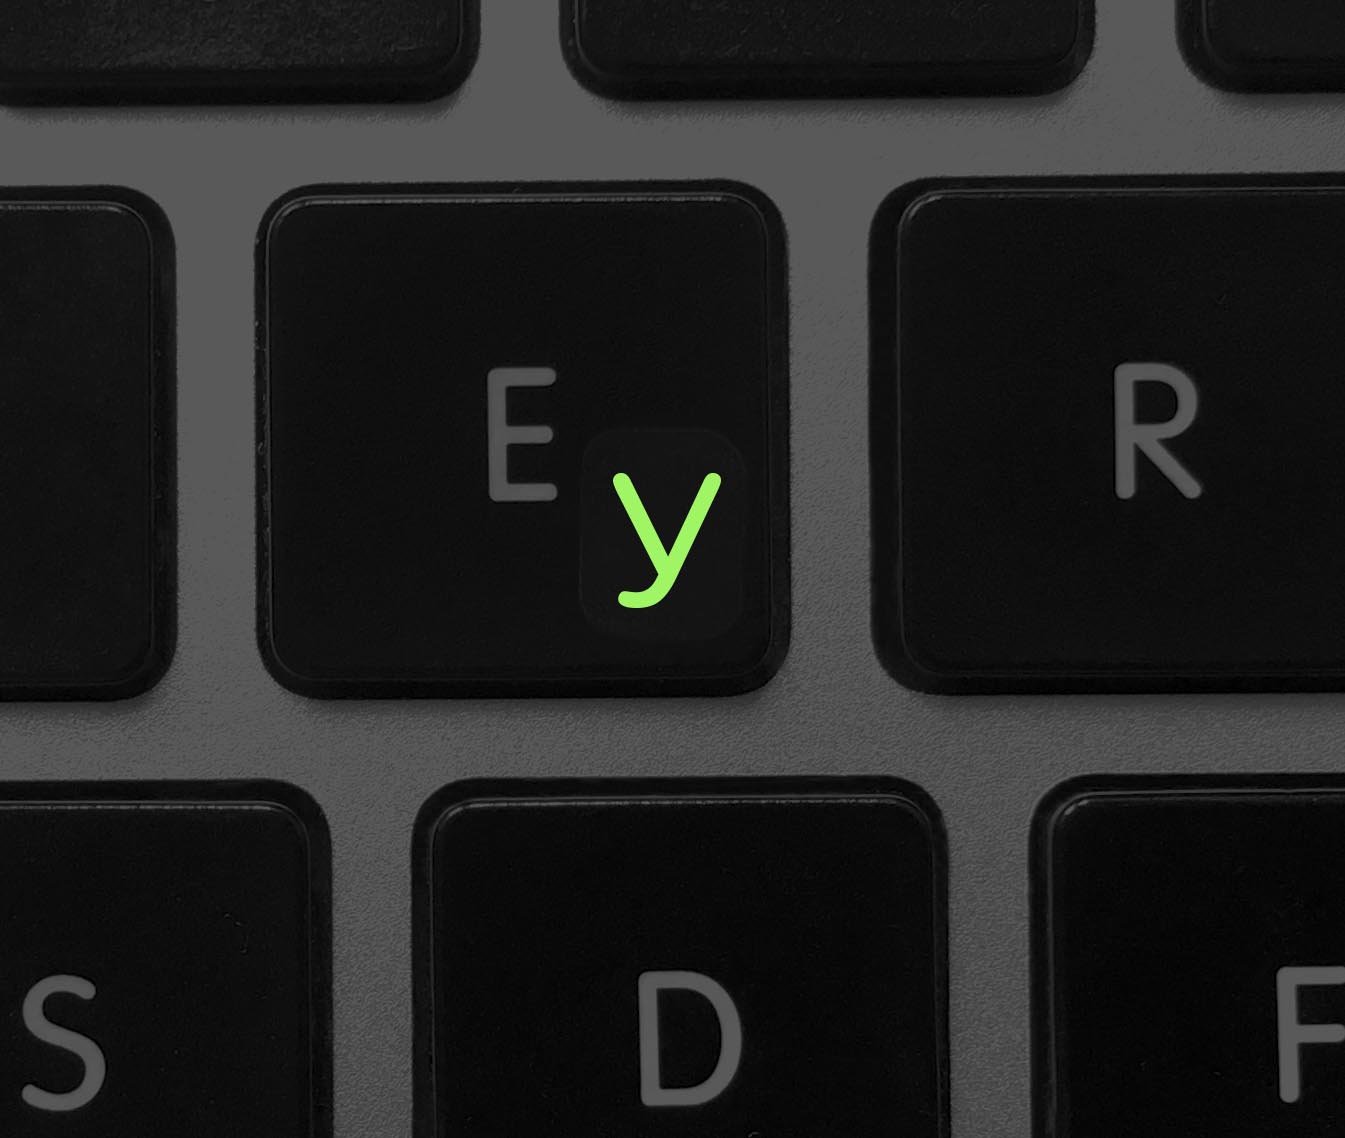 Glowing Cyrillic Small Keyboard Letters with Fluorescent Effect